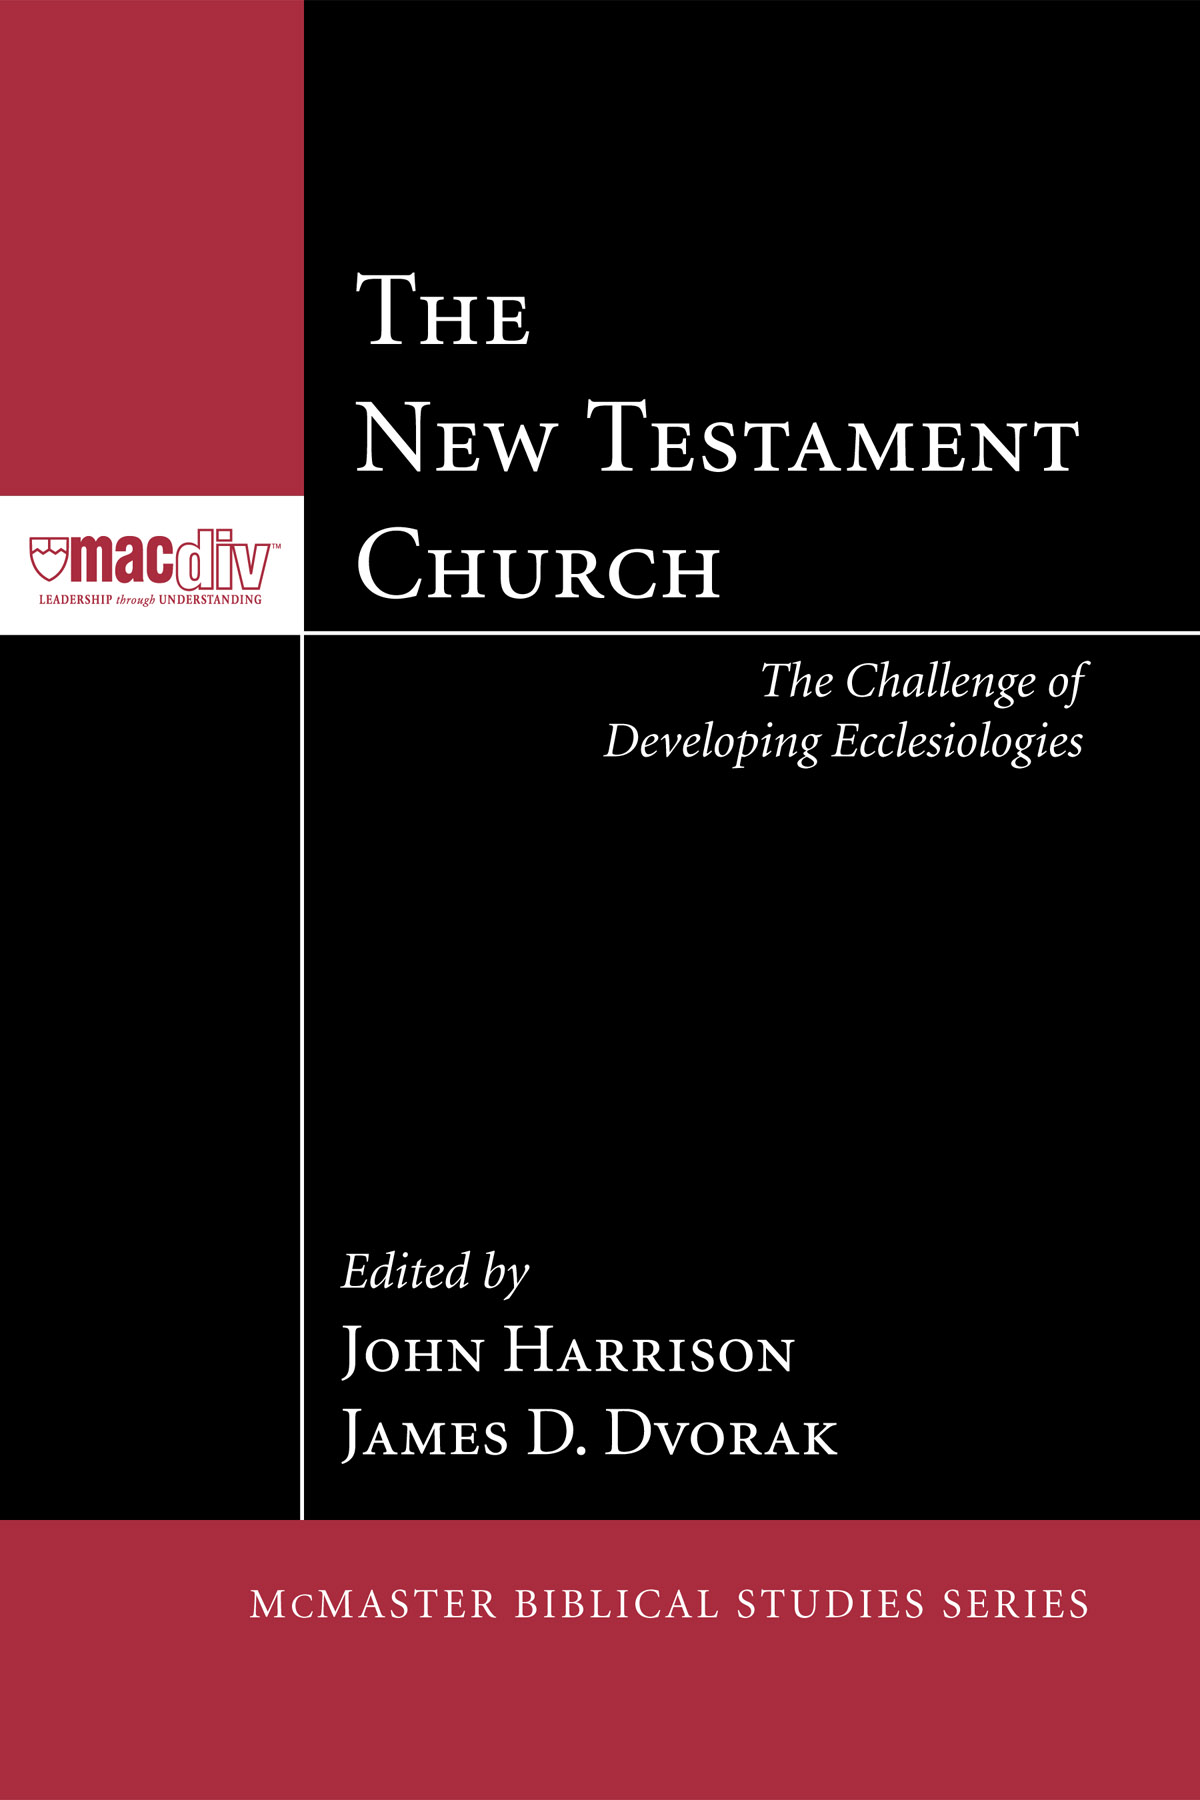 The New Testament Church: The Challenge of Developing Ecclesiologies